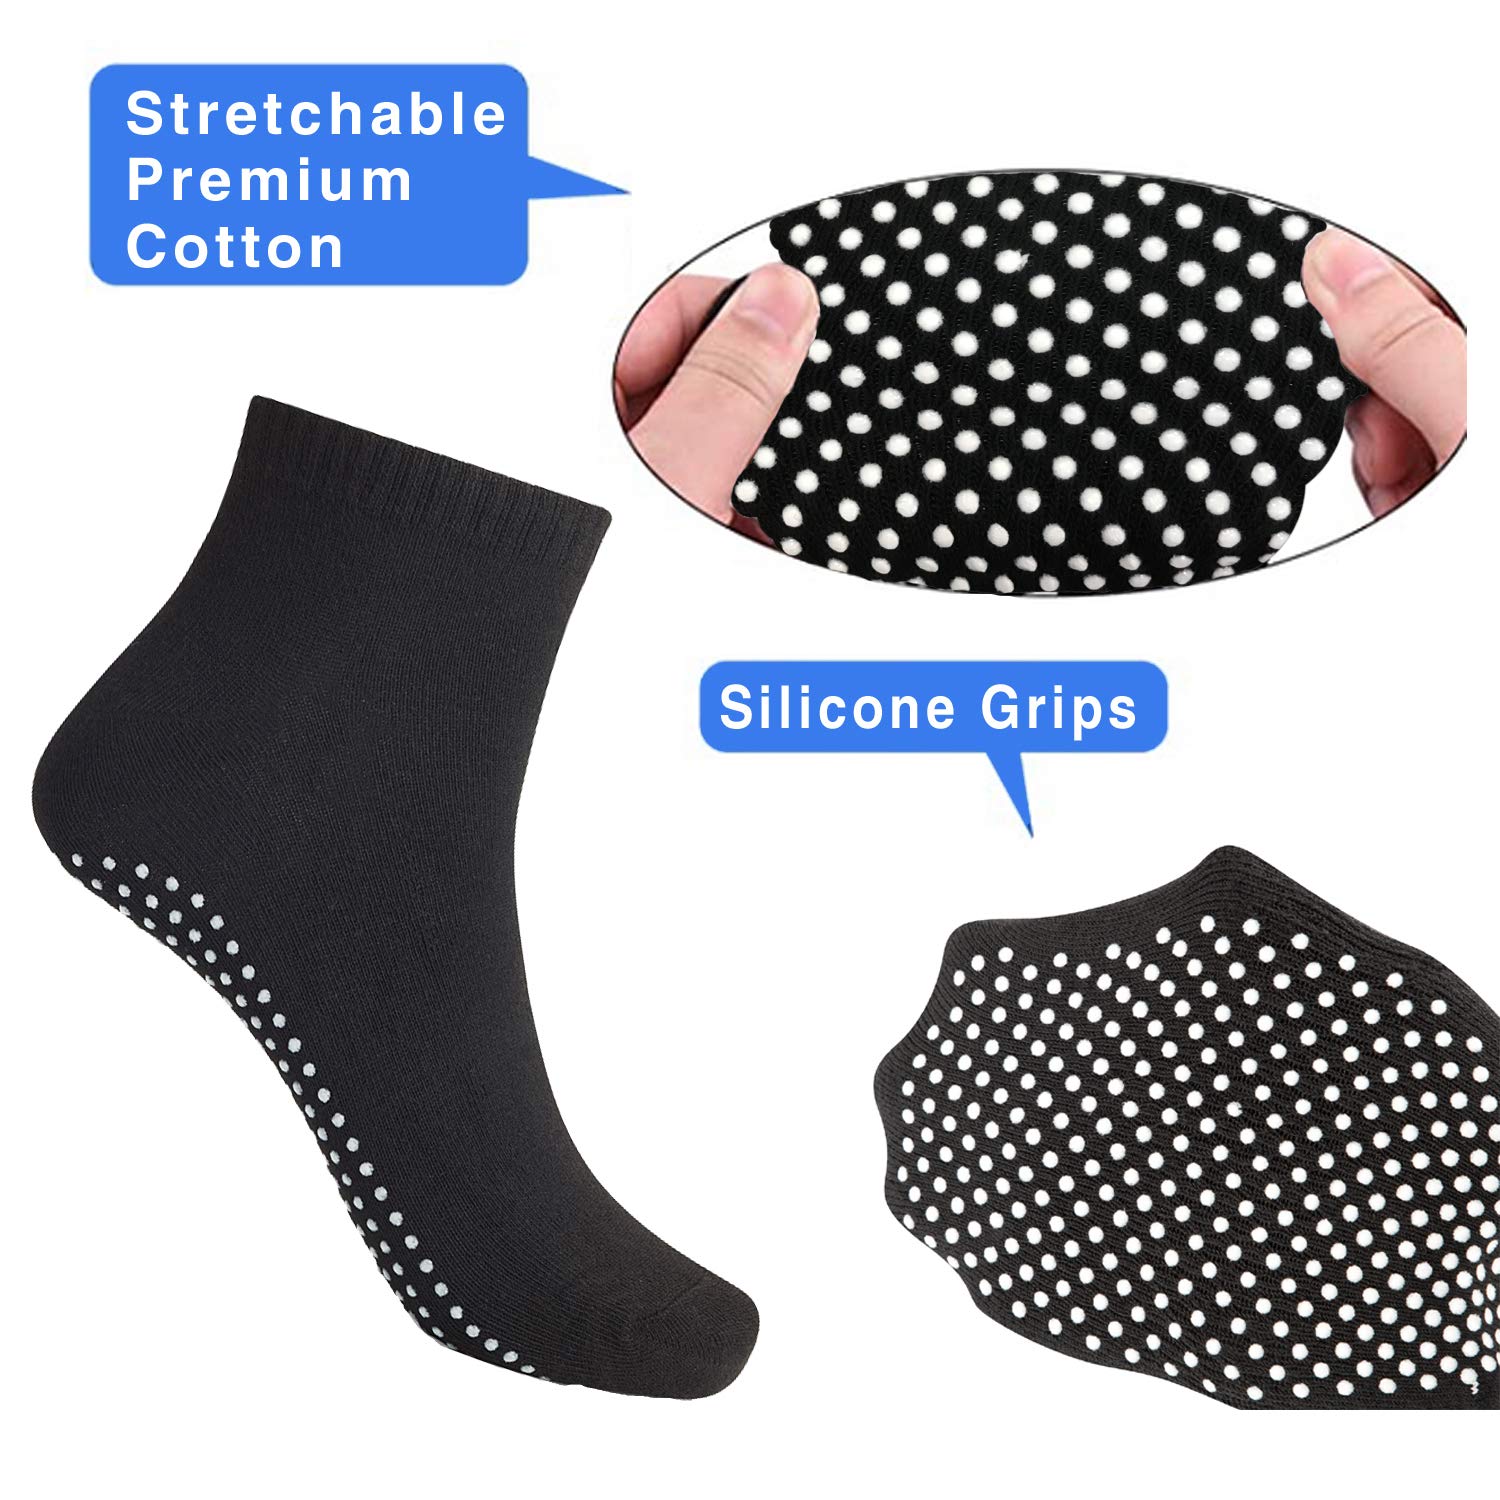 NEWCHAO Anti Slip Socks Non Skid Grip Socks,4 pairs Unisex for Yoga Home Workout Barre Pilates Pregnancy Hospital Men Women in Black and Grey